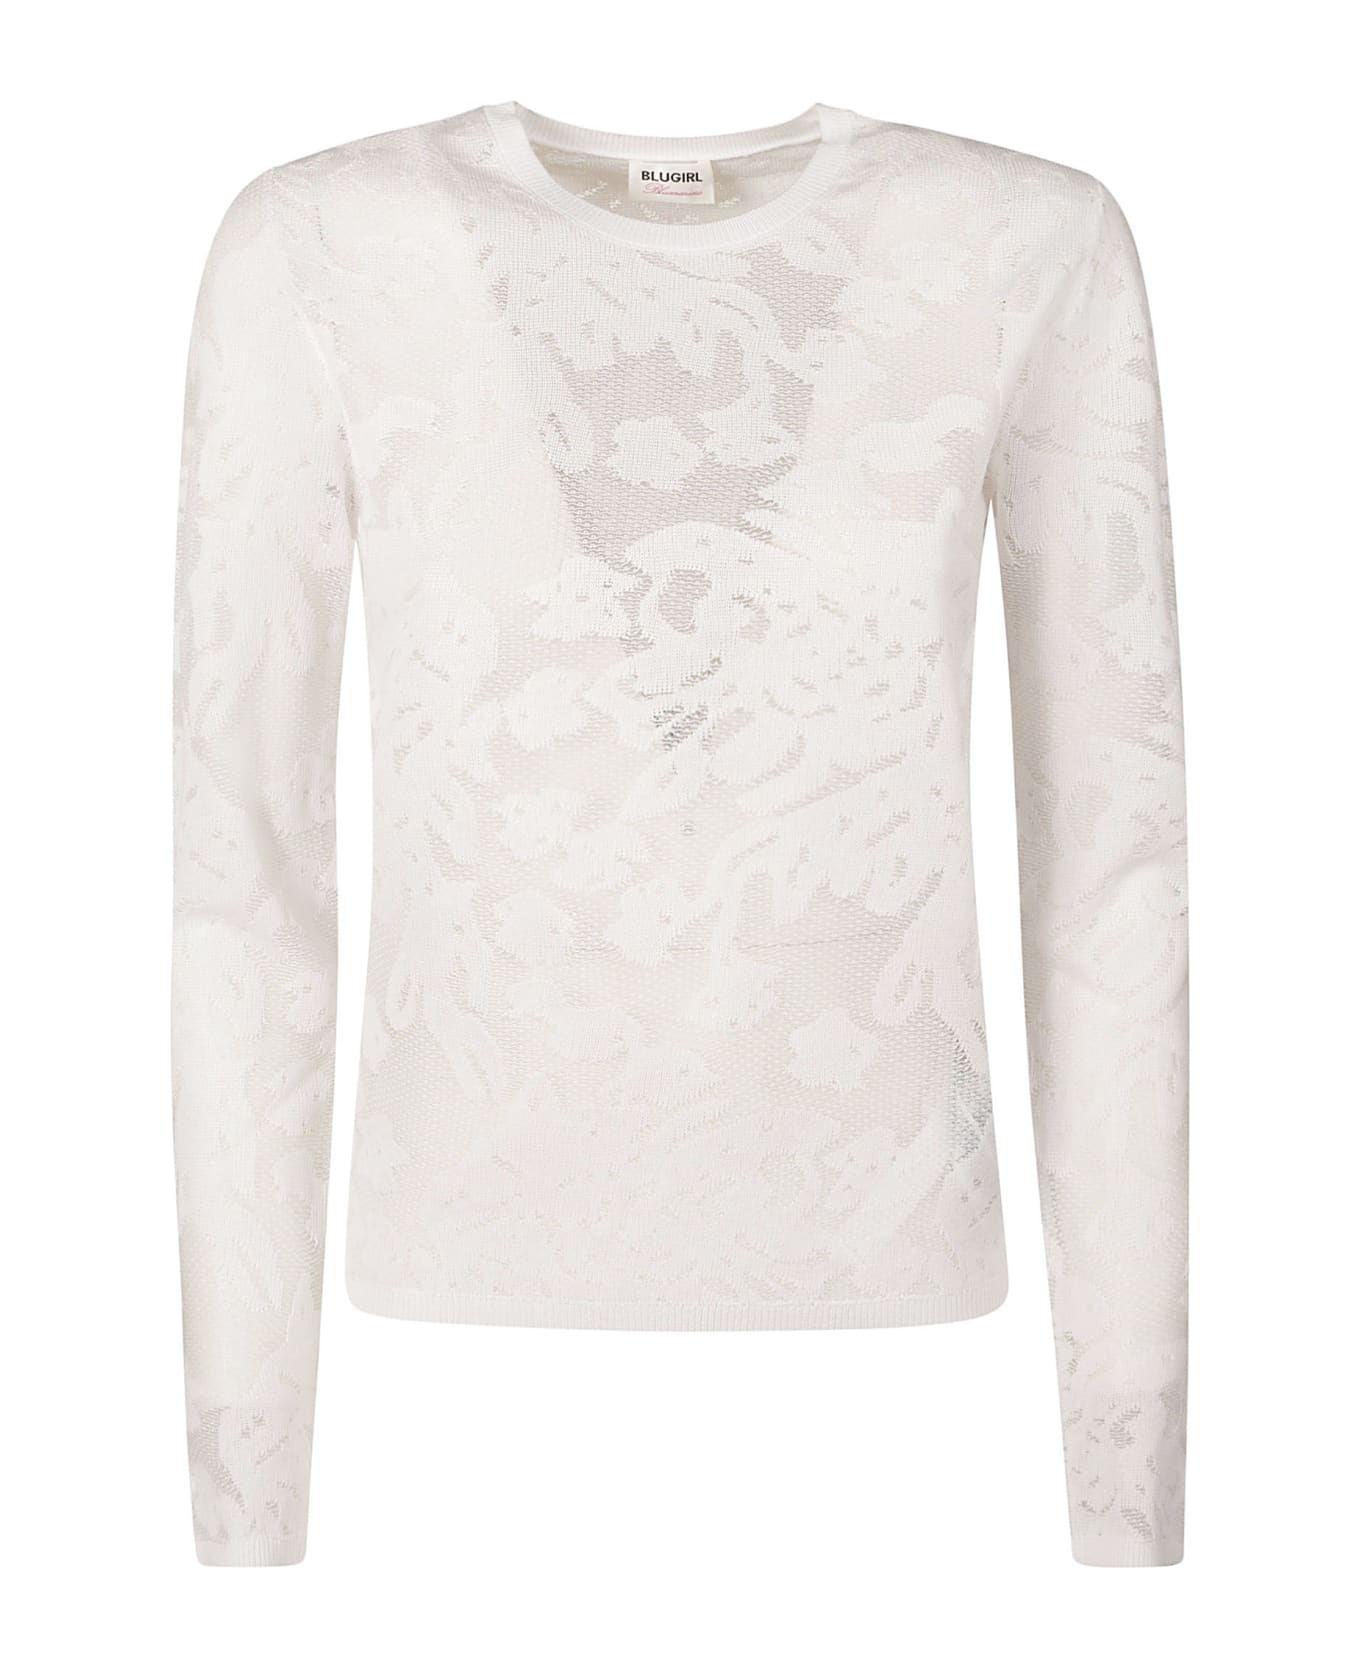 Blugirl Long-sleeved Floral Lace Top - Bianco トップス